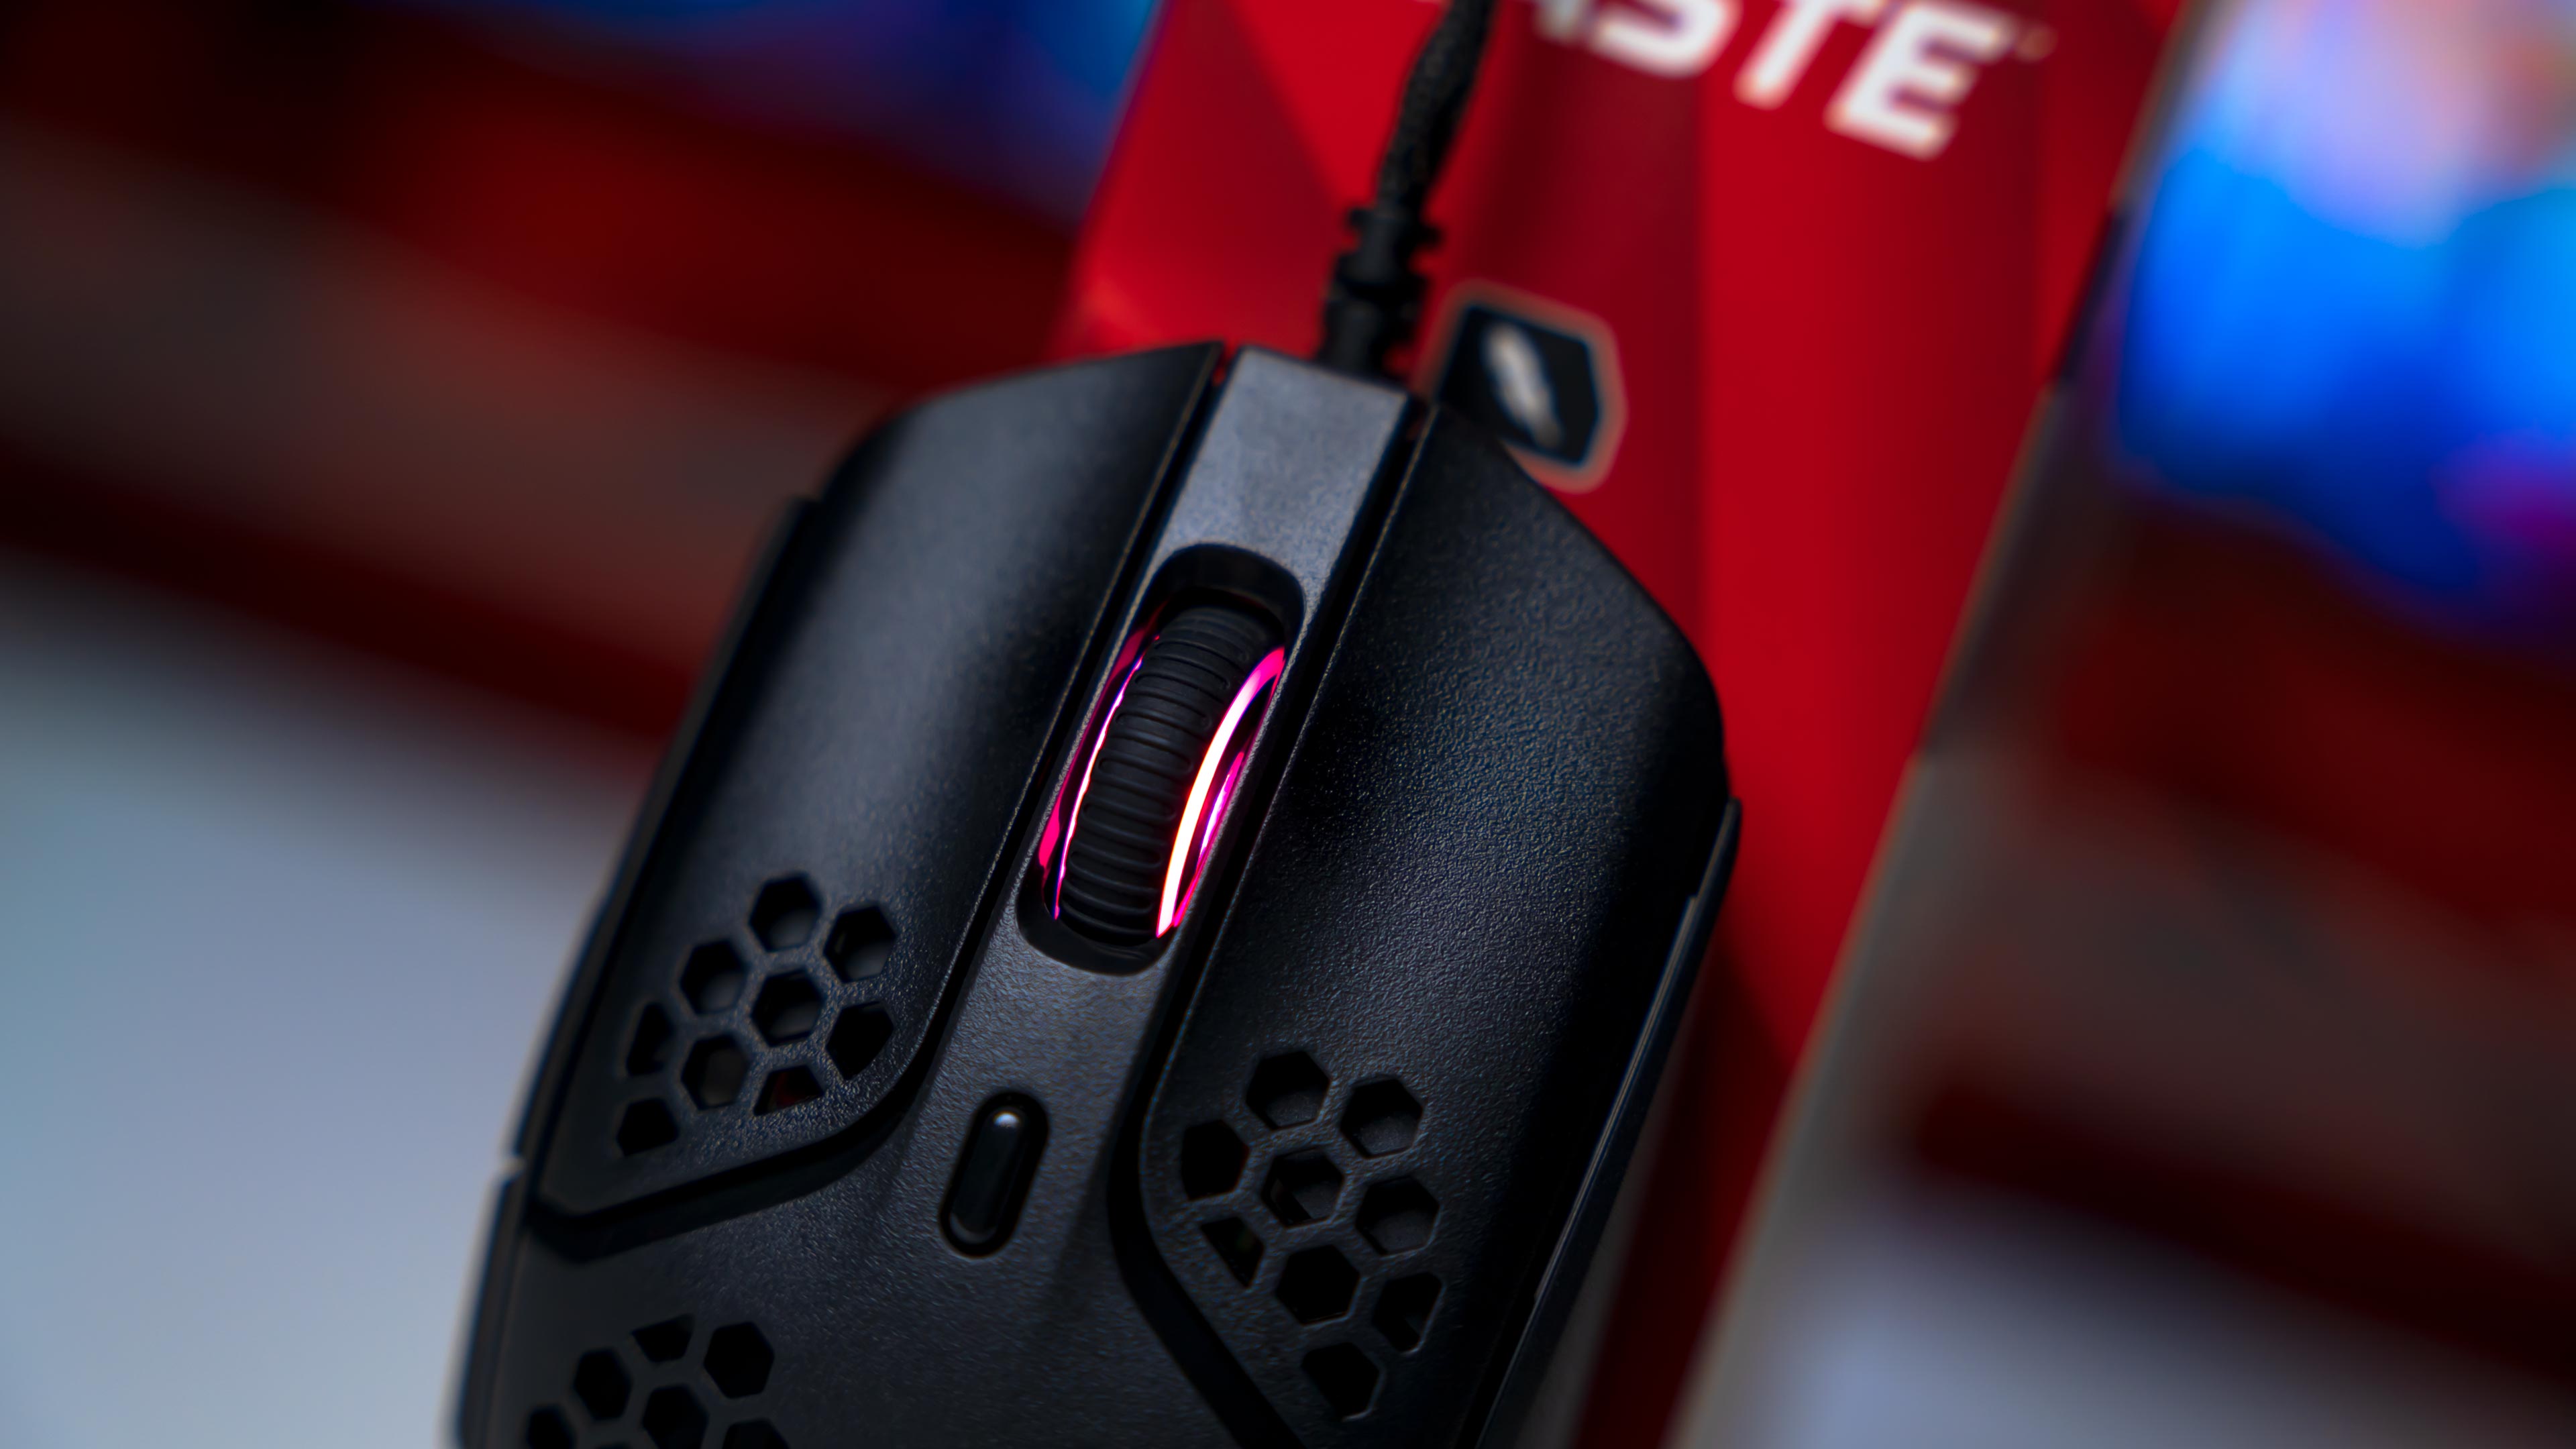 HyperX Pulsefire Haste Gaming Mouse (1)